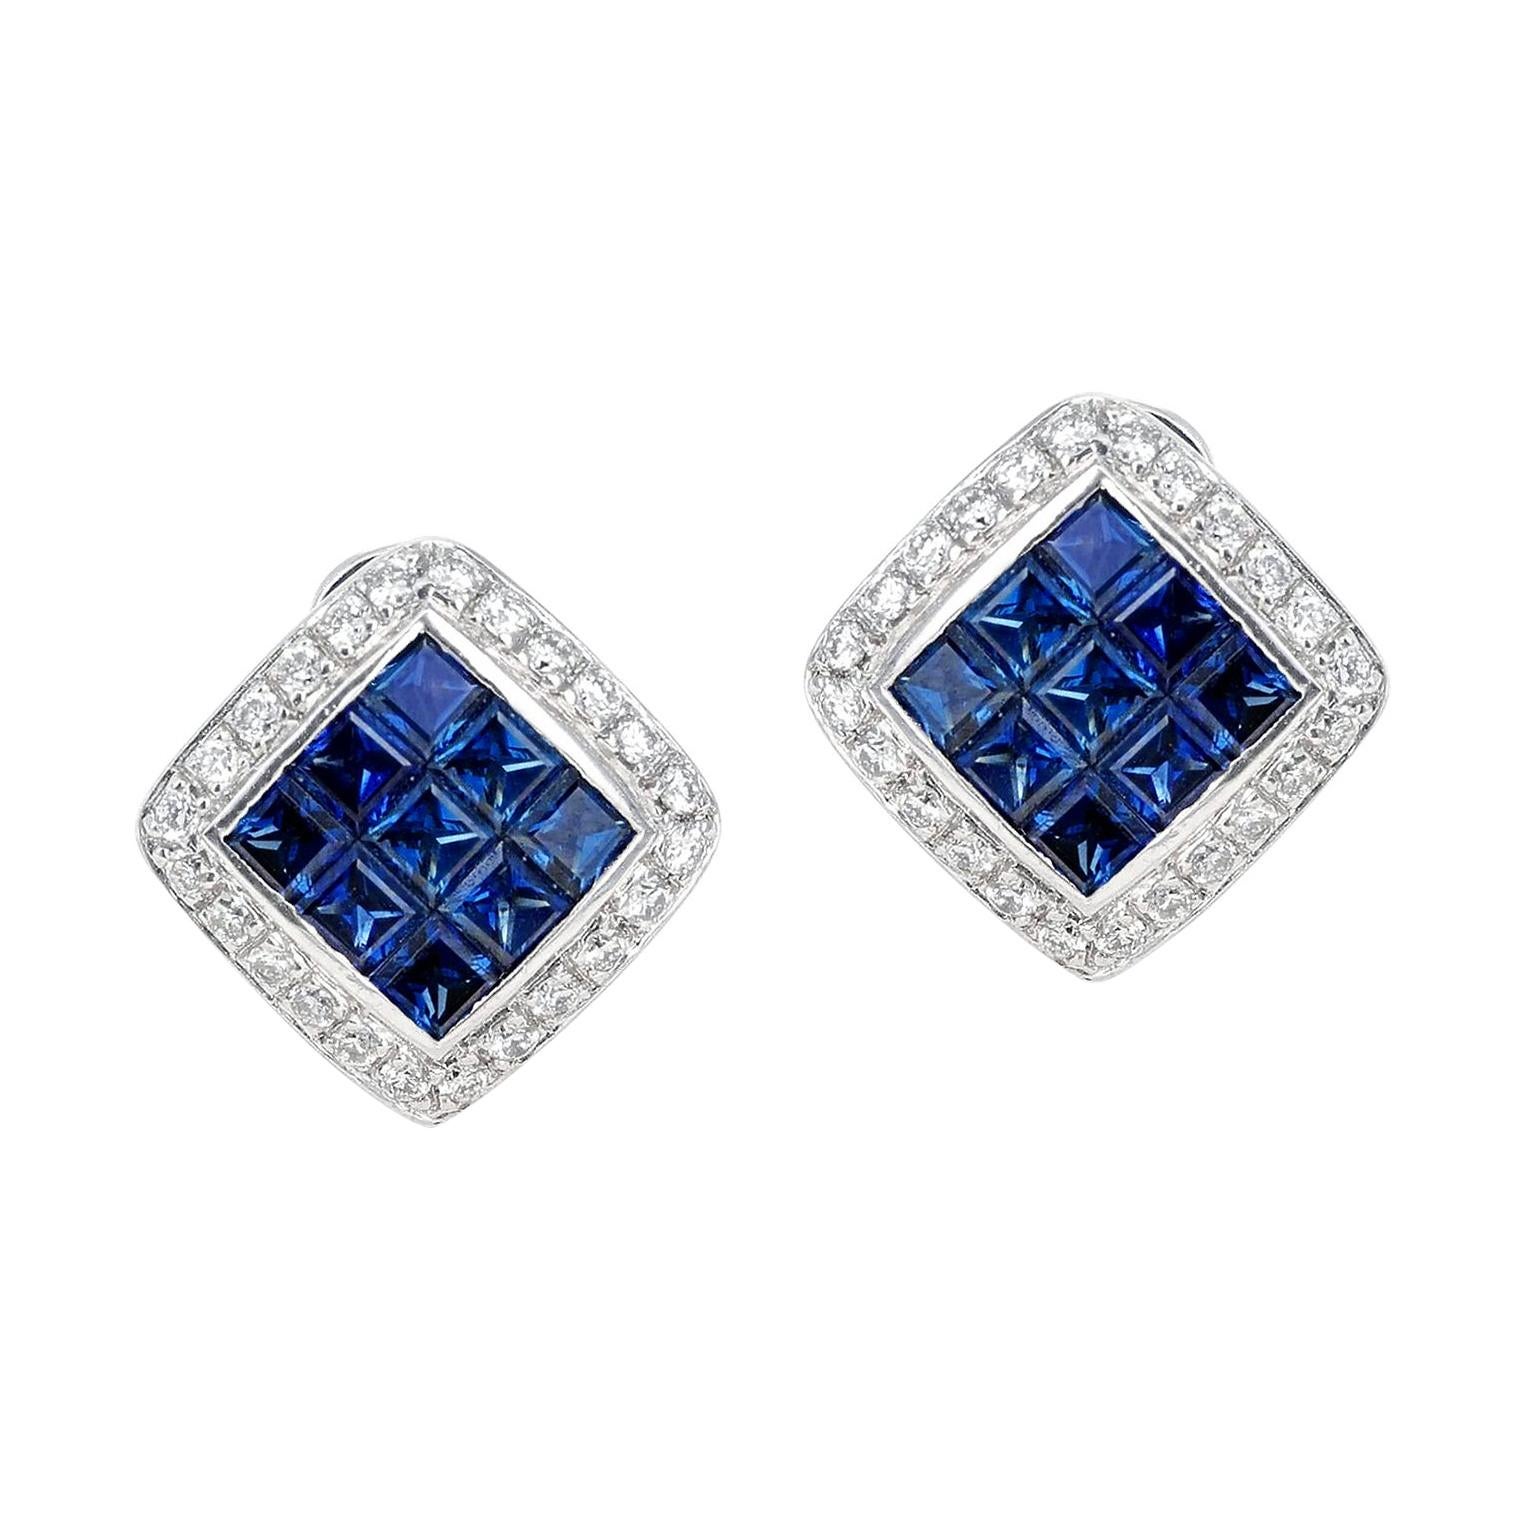 Square 3 Ct. Sapphire and Diamonds 0.60 Carats 18K White Gold Earrings For Sale